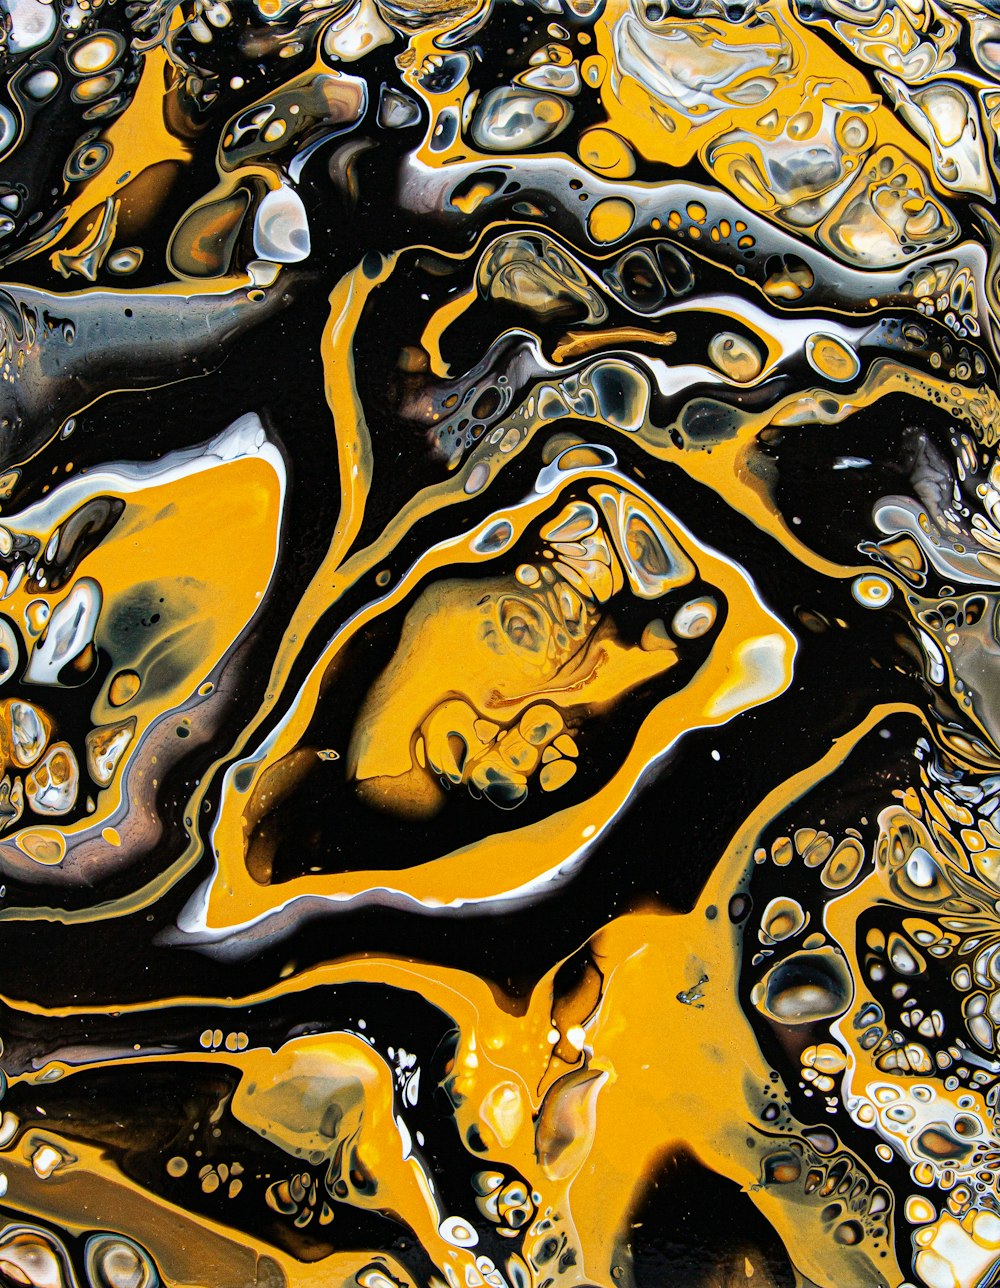 a close up view of a yellow and black liquid